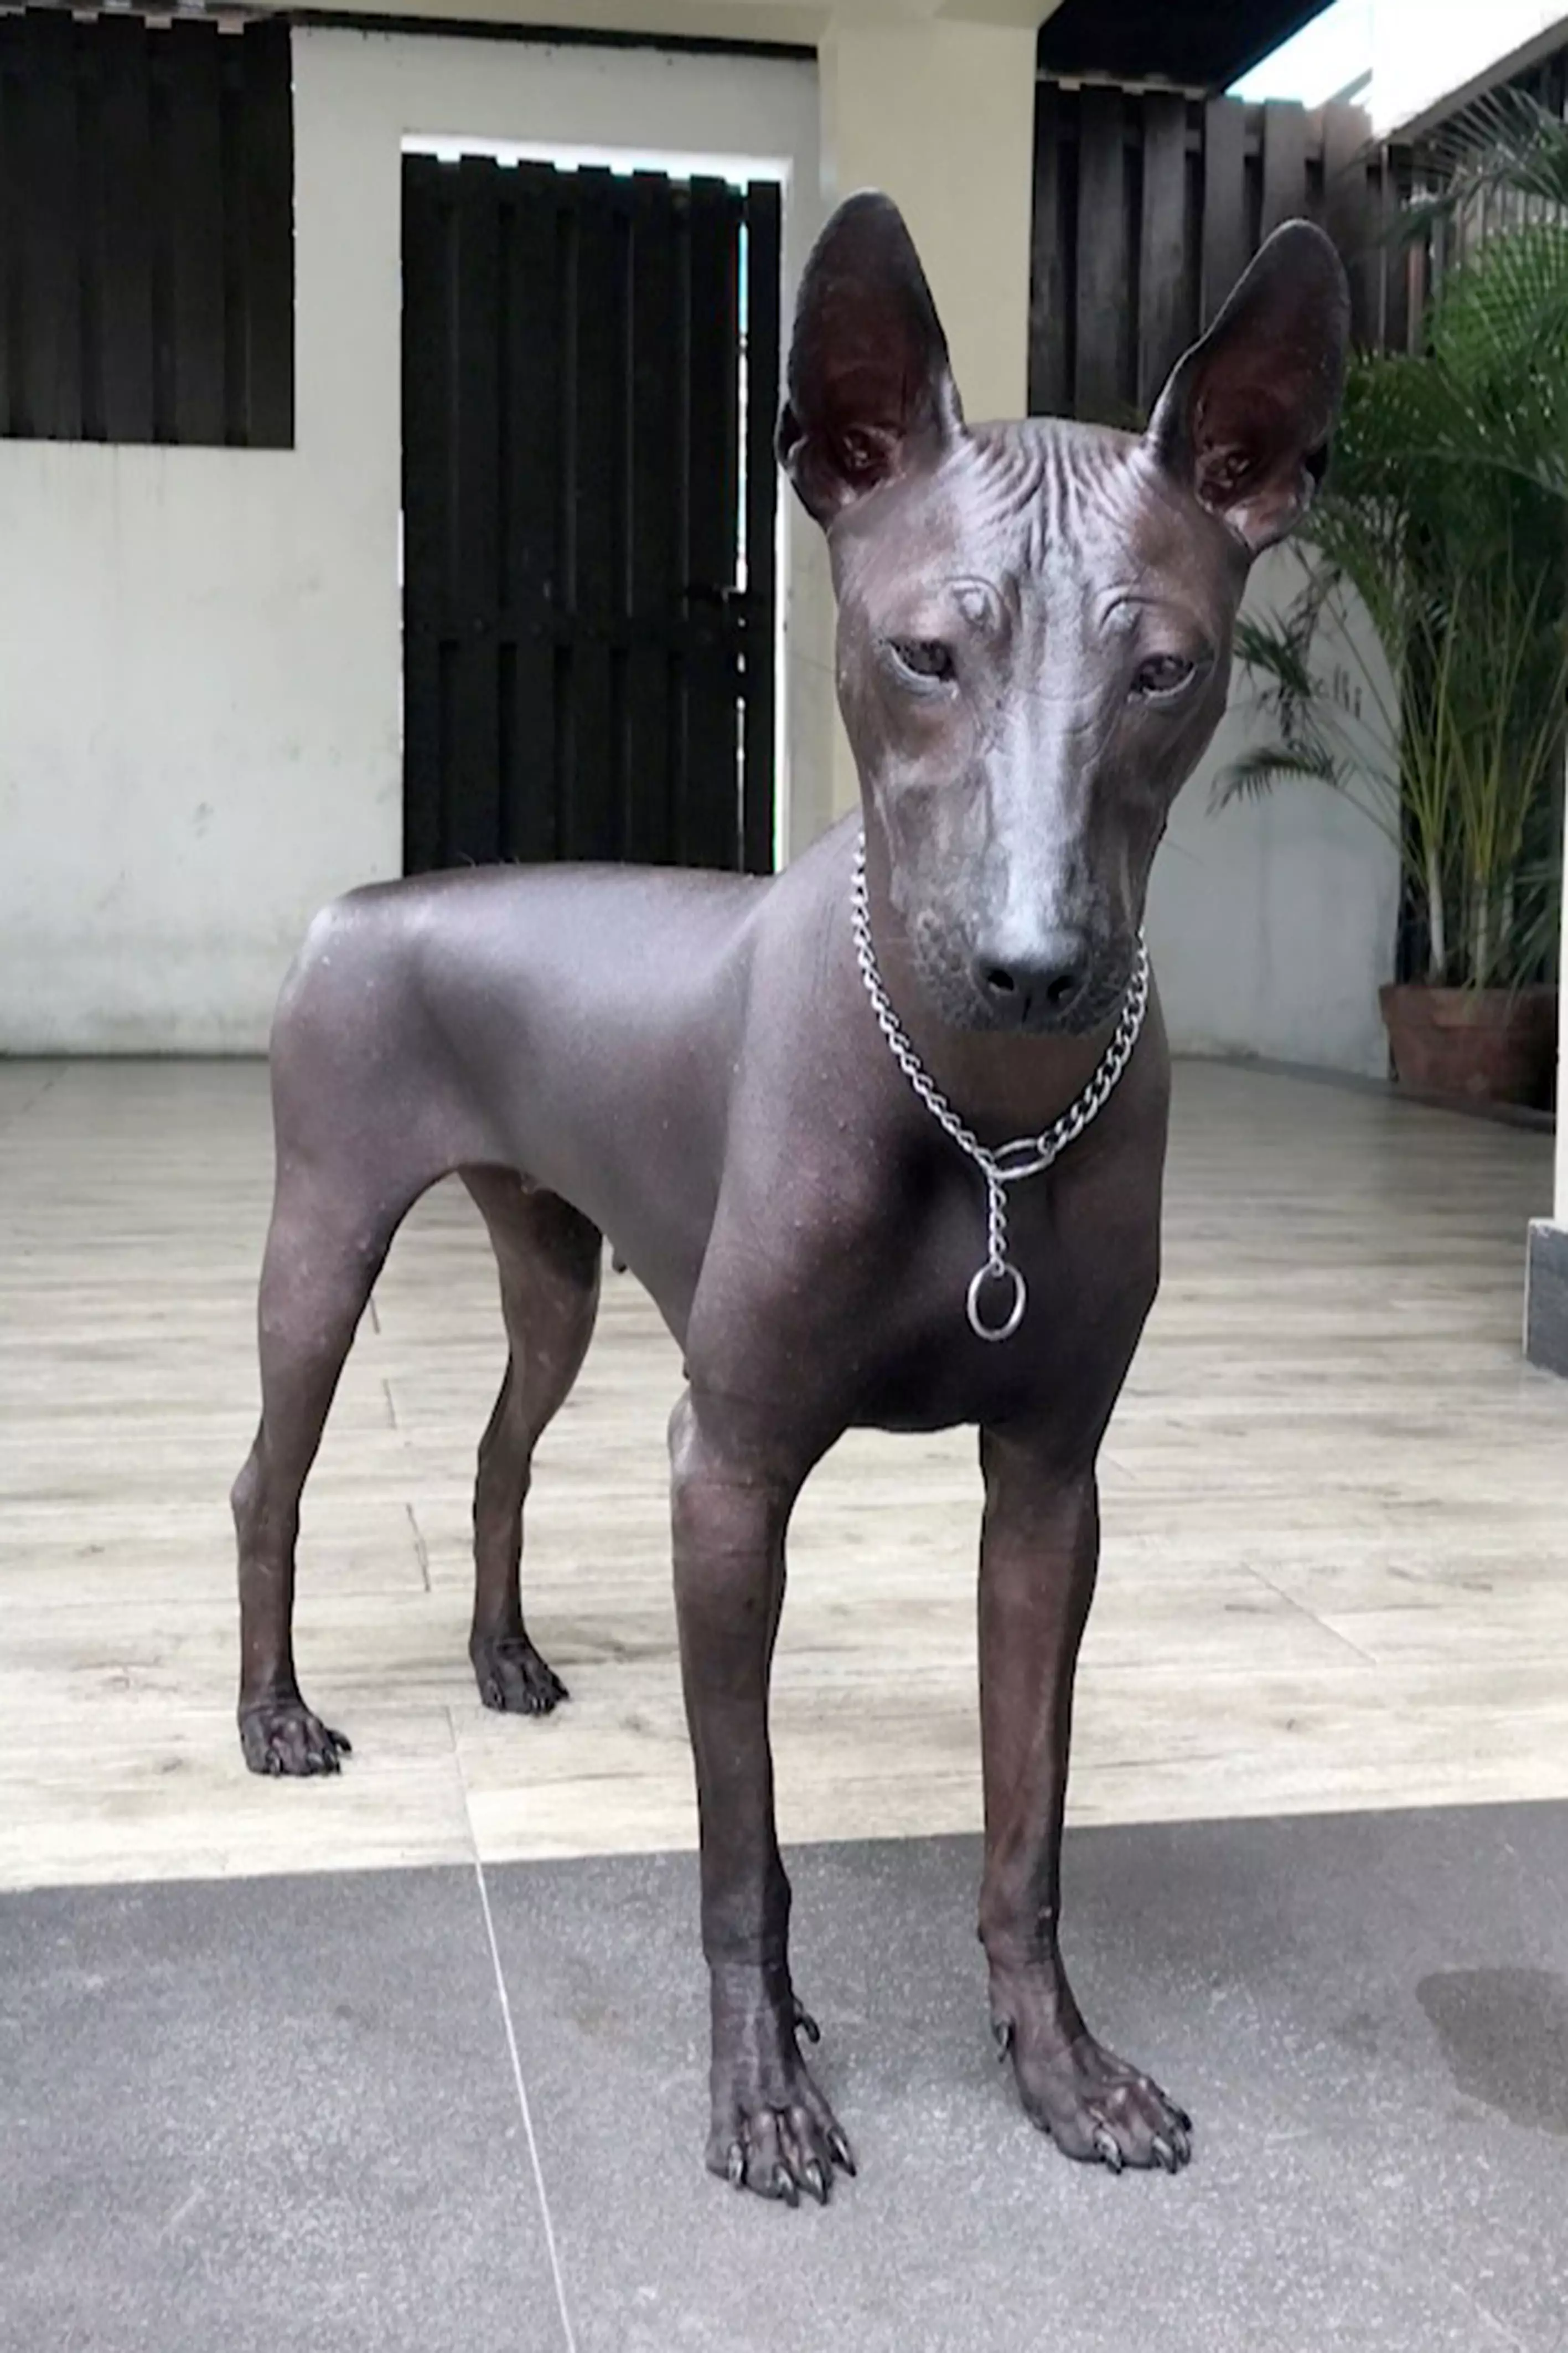 People online were convinced this dog was a statue.